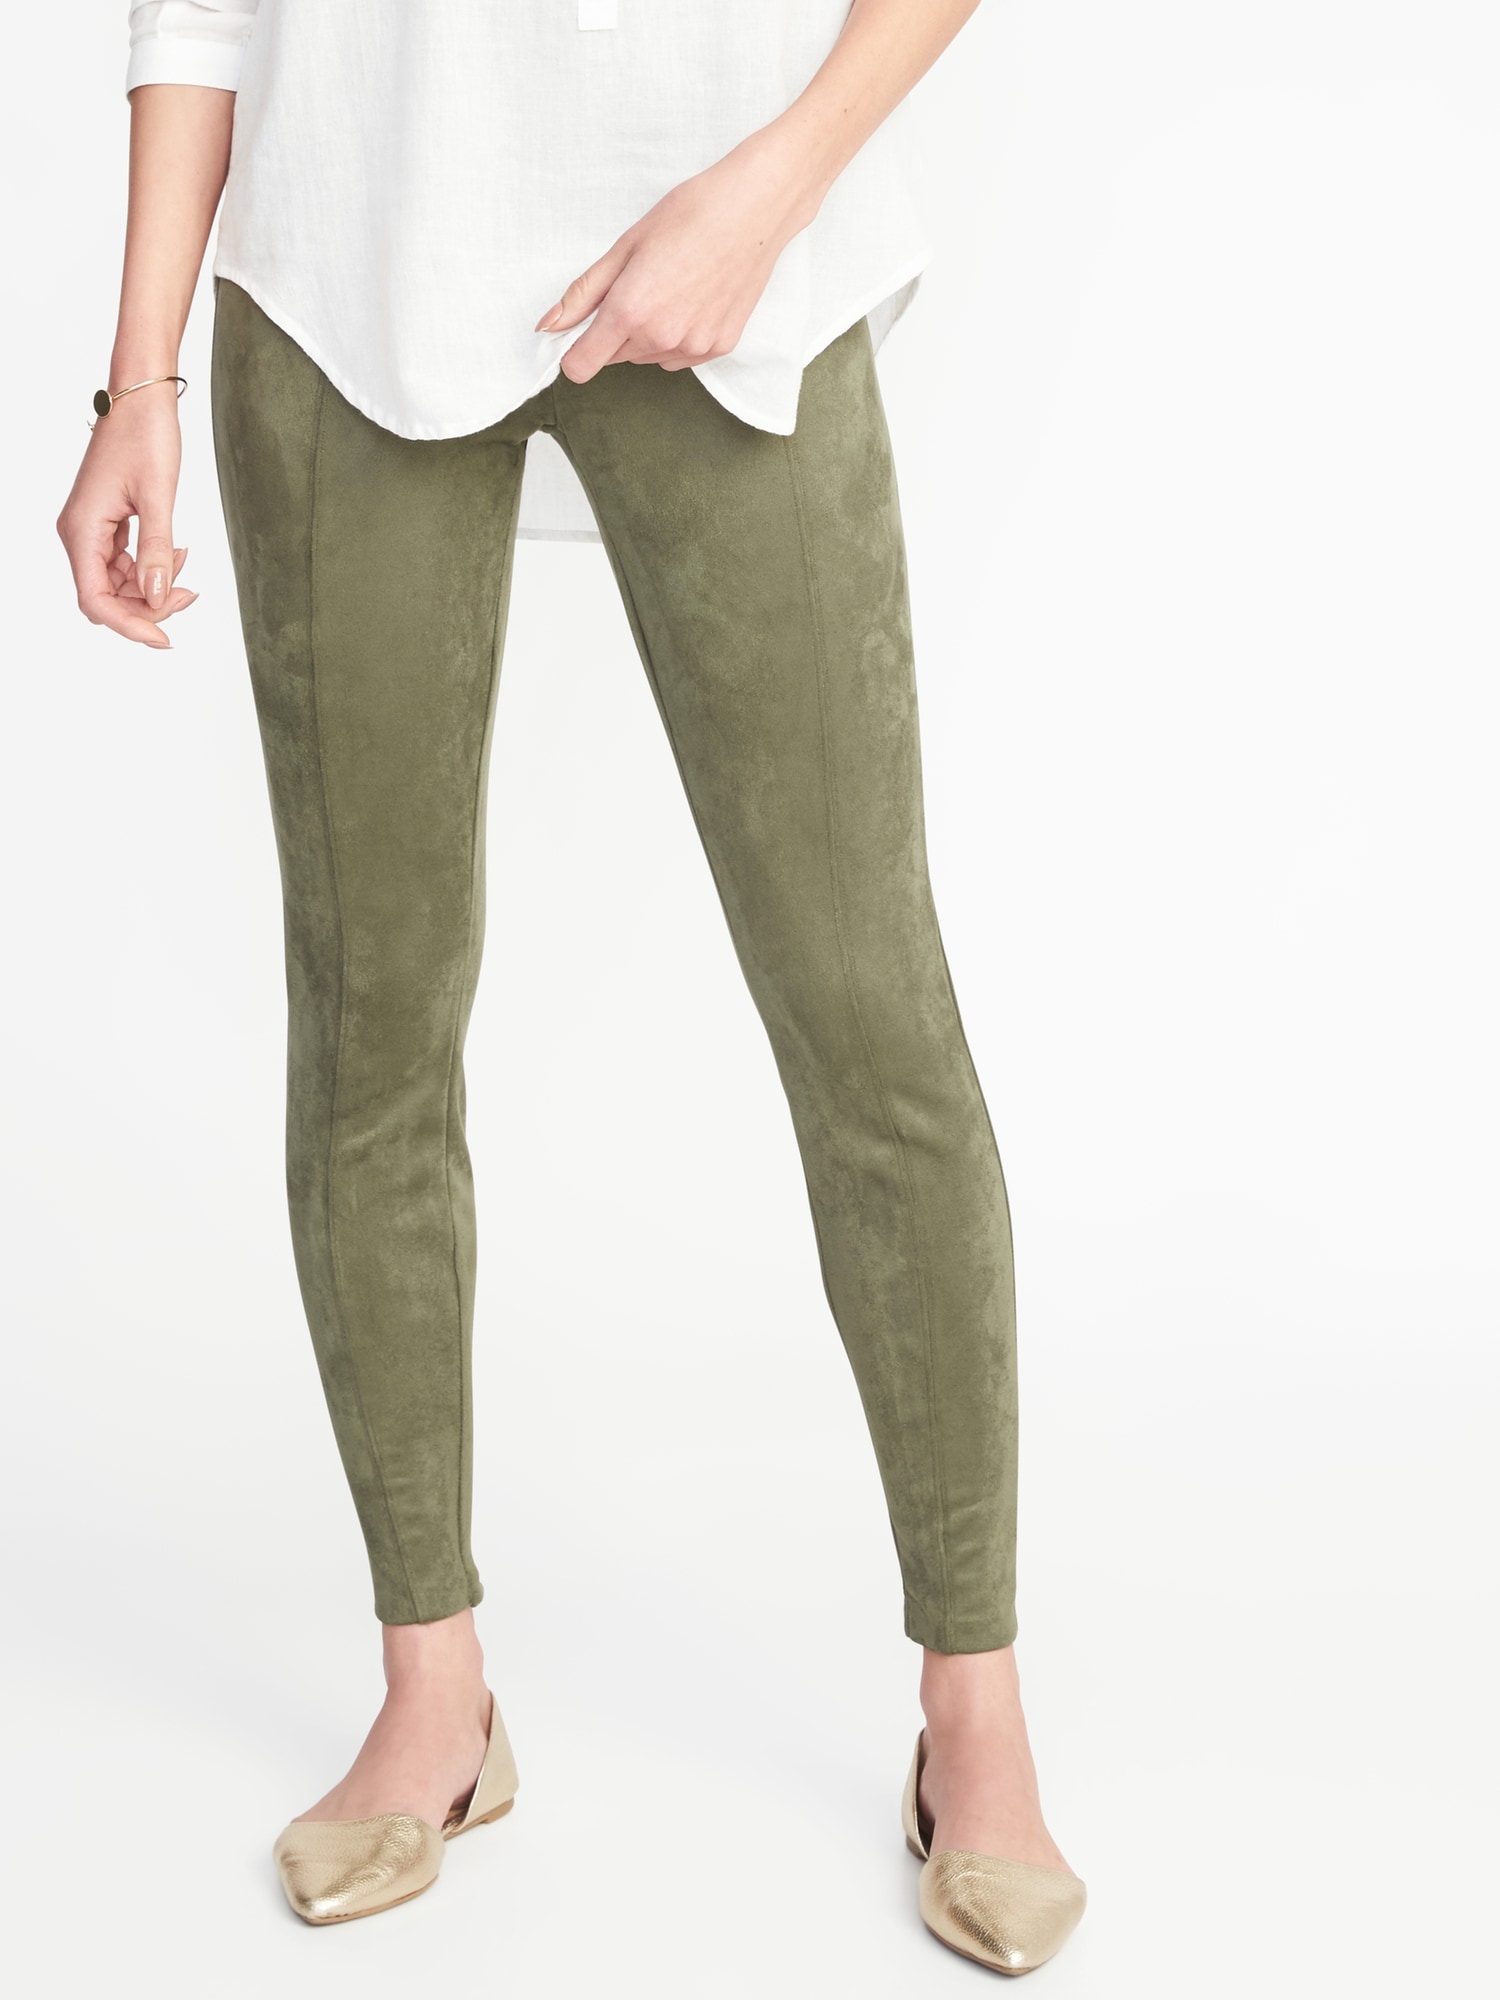 High-Waisted Stevie Metallic Ponte-Knit Pants for Women, Old Navy